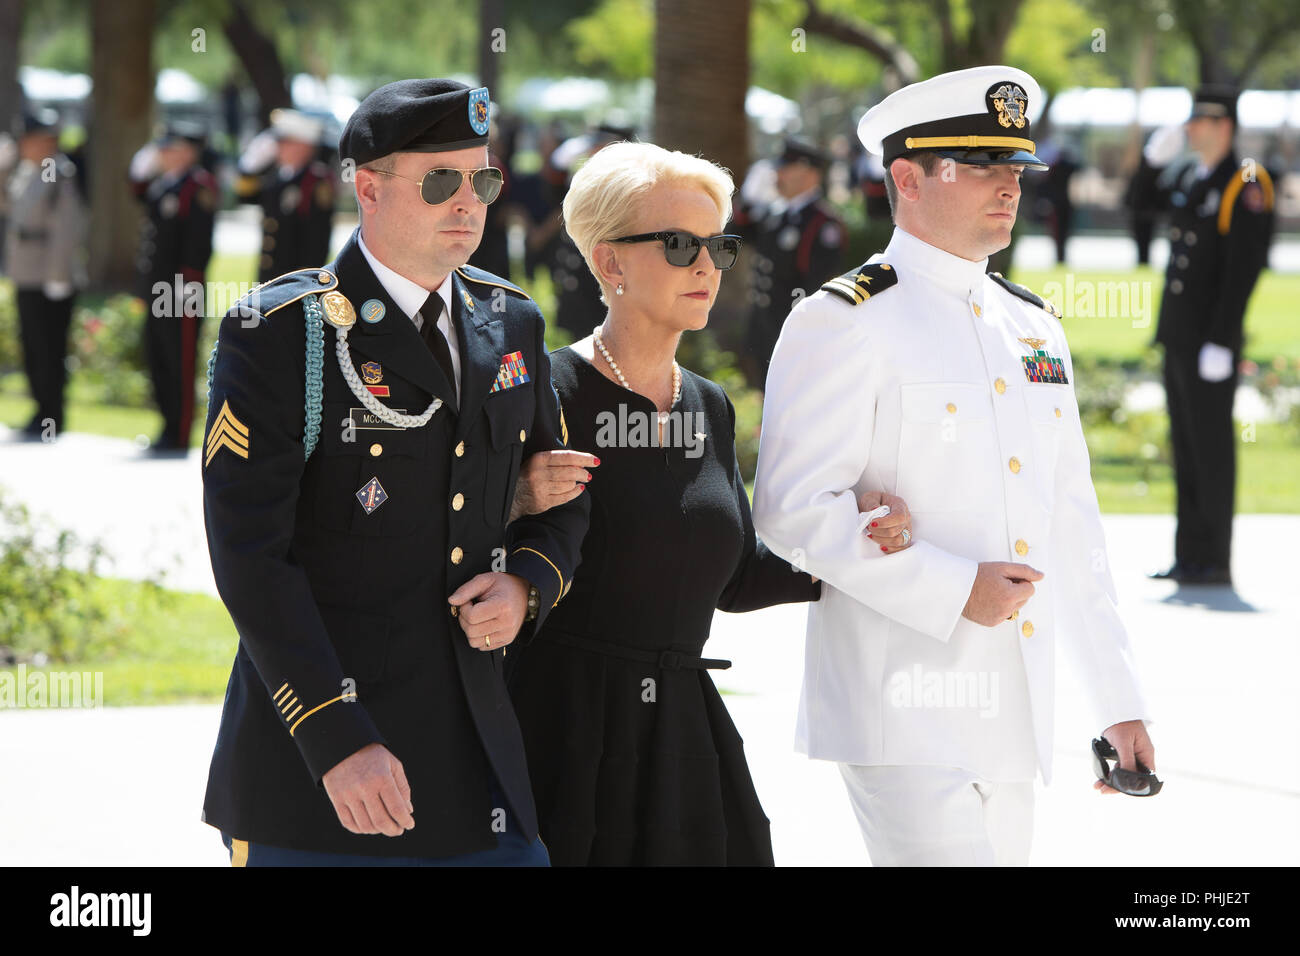 Cindy McCain, wife of Senator John McCain is escorted by her sons, Navy Lt. Jimmy McCain (left) and Arizona Army National Guard Sgt. Jack McCain (right) as they arrive for the memorial service for her at the North Phoenix Baptist Church August 29, 2018 in Phoenix, Arizona. The former senator’s remains will lie in state in the U.S. Capitol Rotunda before burial at the U.S. Naval Academy. Stock Photo